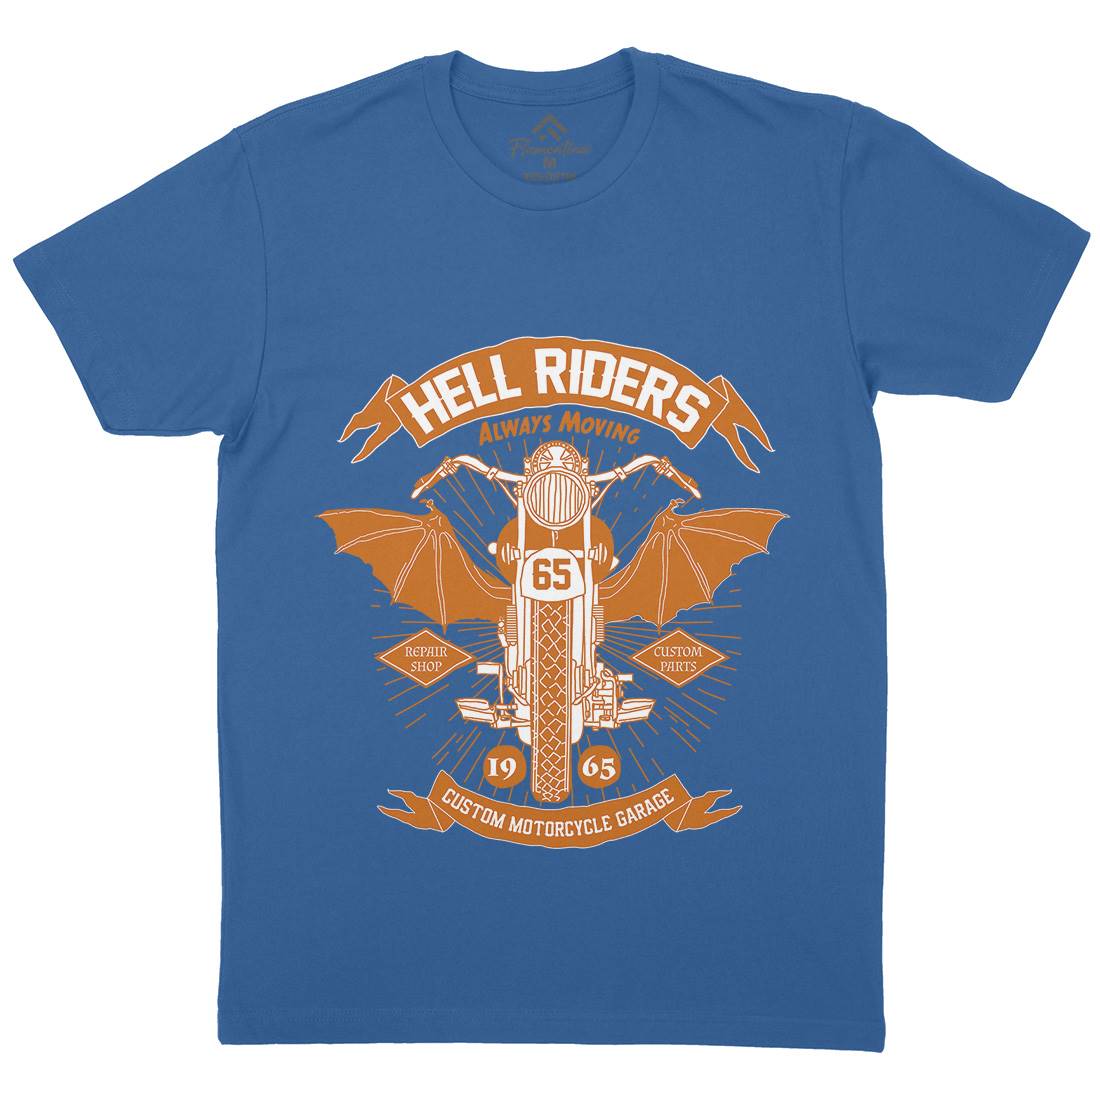 Hell Riders Mens Crew Neck T-Shirt Motorcycles A992